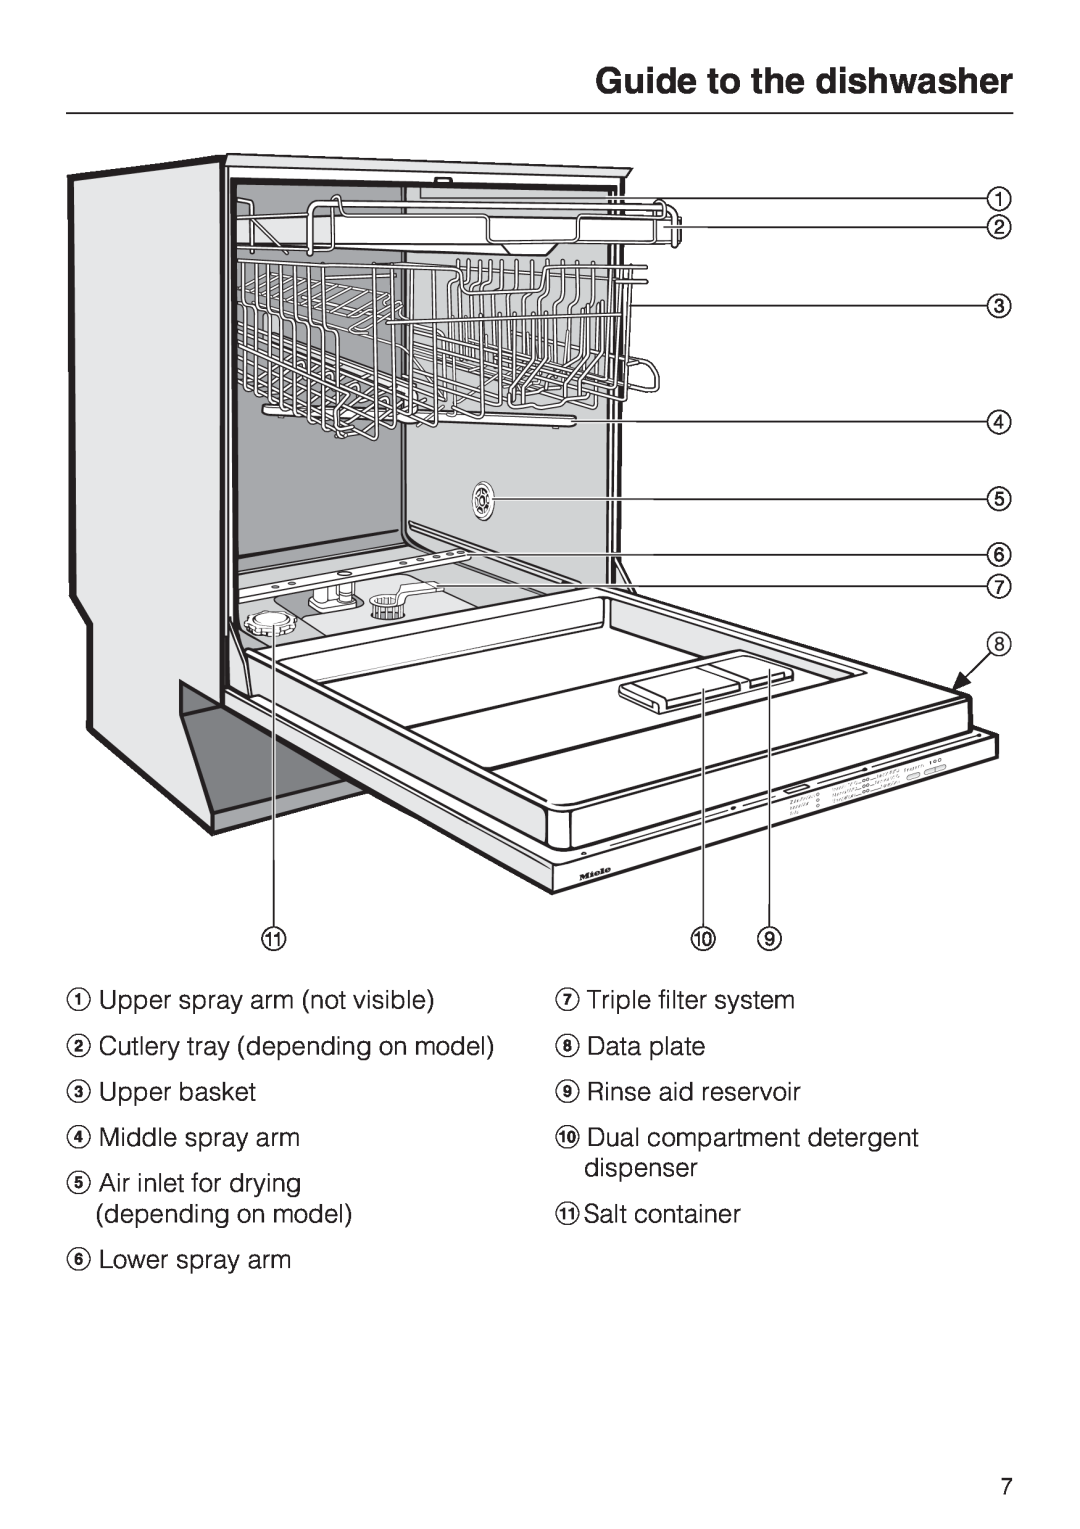 Miele G 5170, G 5175 manual Guide to the dishwasher 